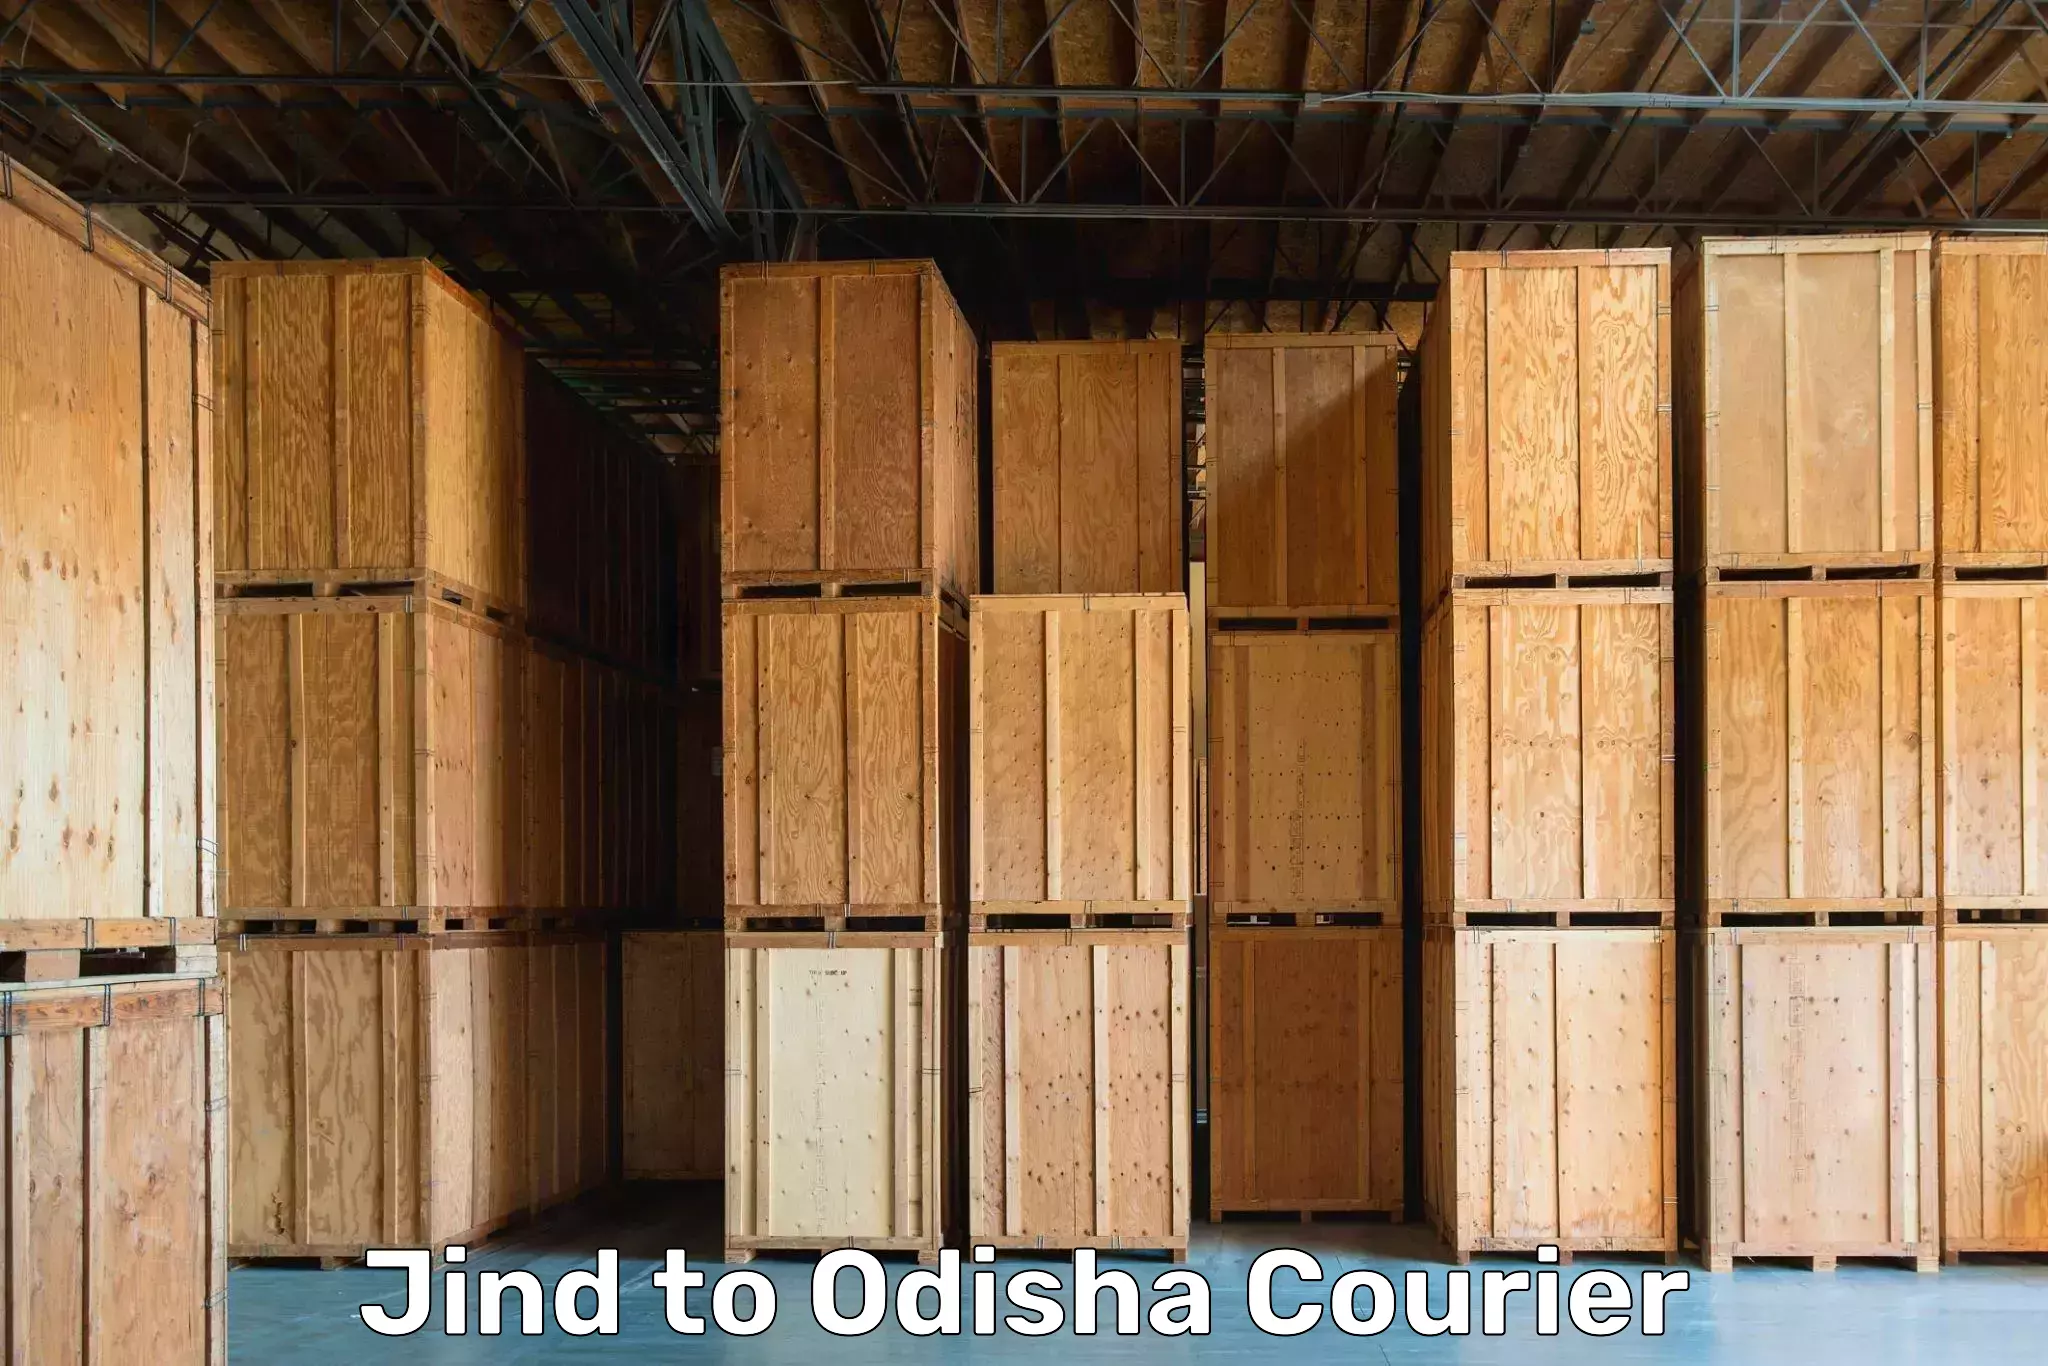 Furniture delivery service Jind to Dhamara